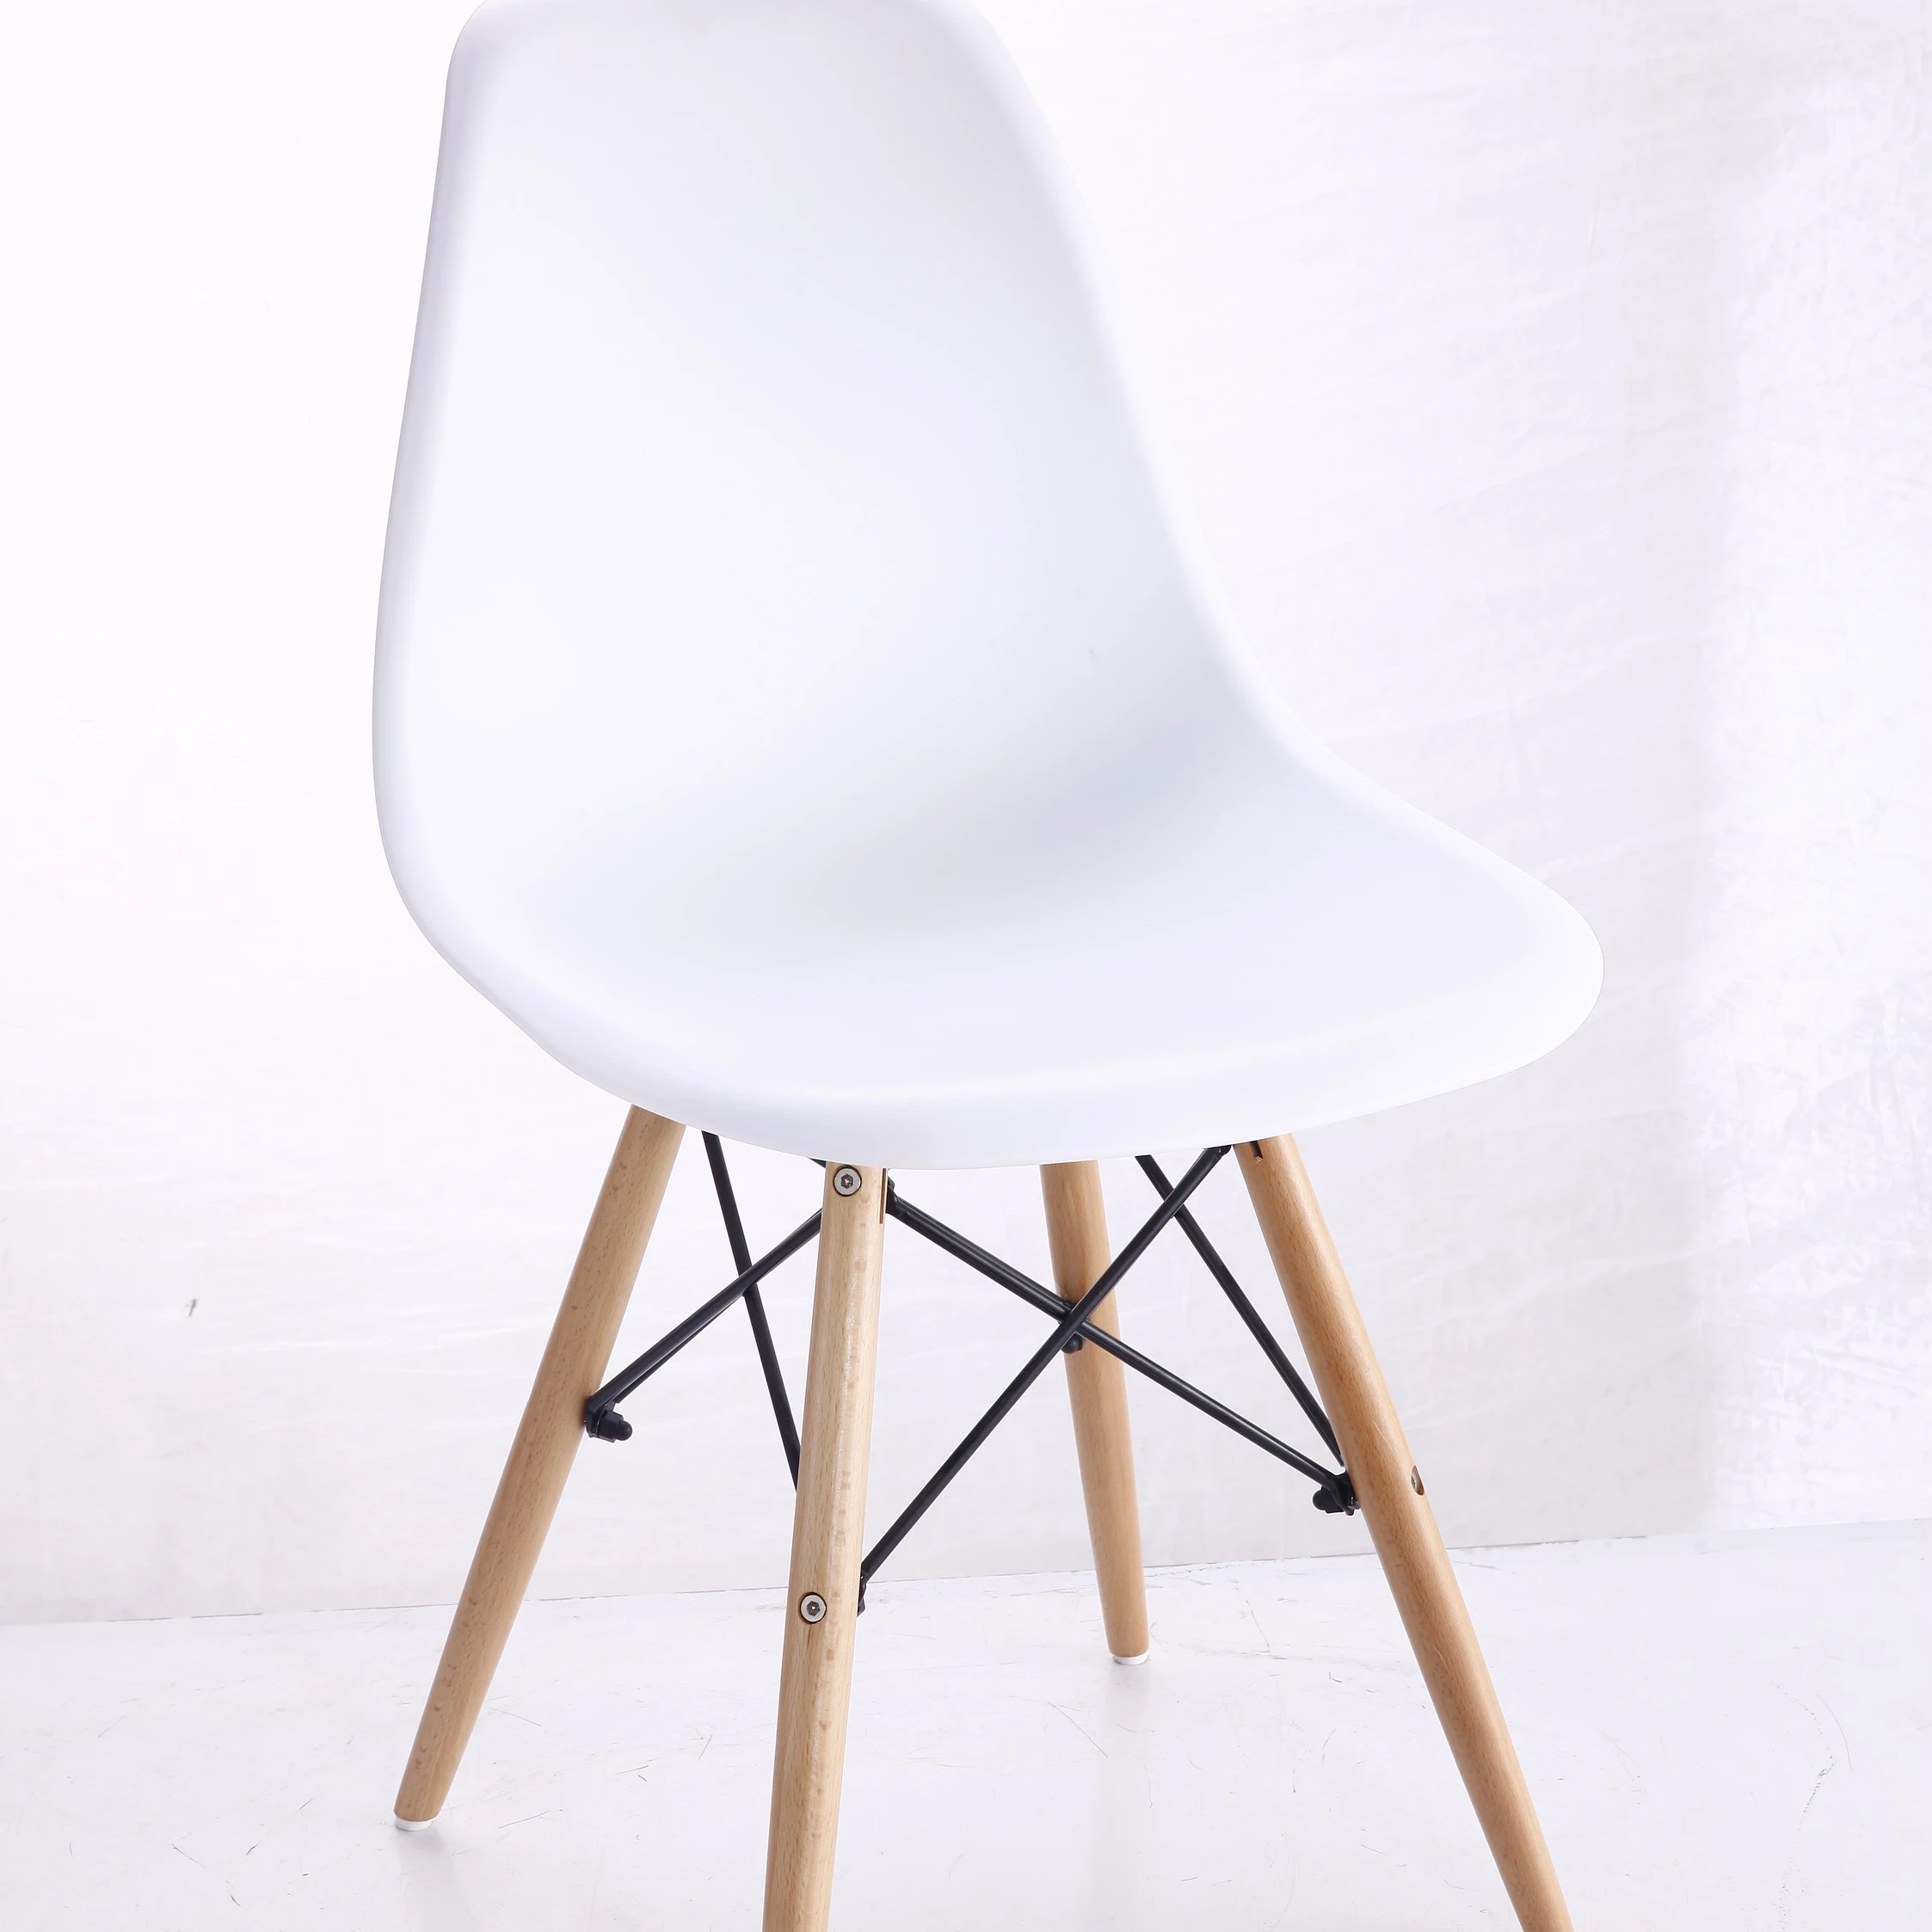 Cheap White Kitchen Replica Eams Plastic Chair With Wooden Legs Restaurant Dining Chair For Sale Chair Of Plastic Buy Dining Chair For Sale Decorative Pp Shell Dining Chair Plastic Kitchen Wooden